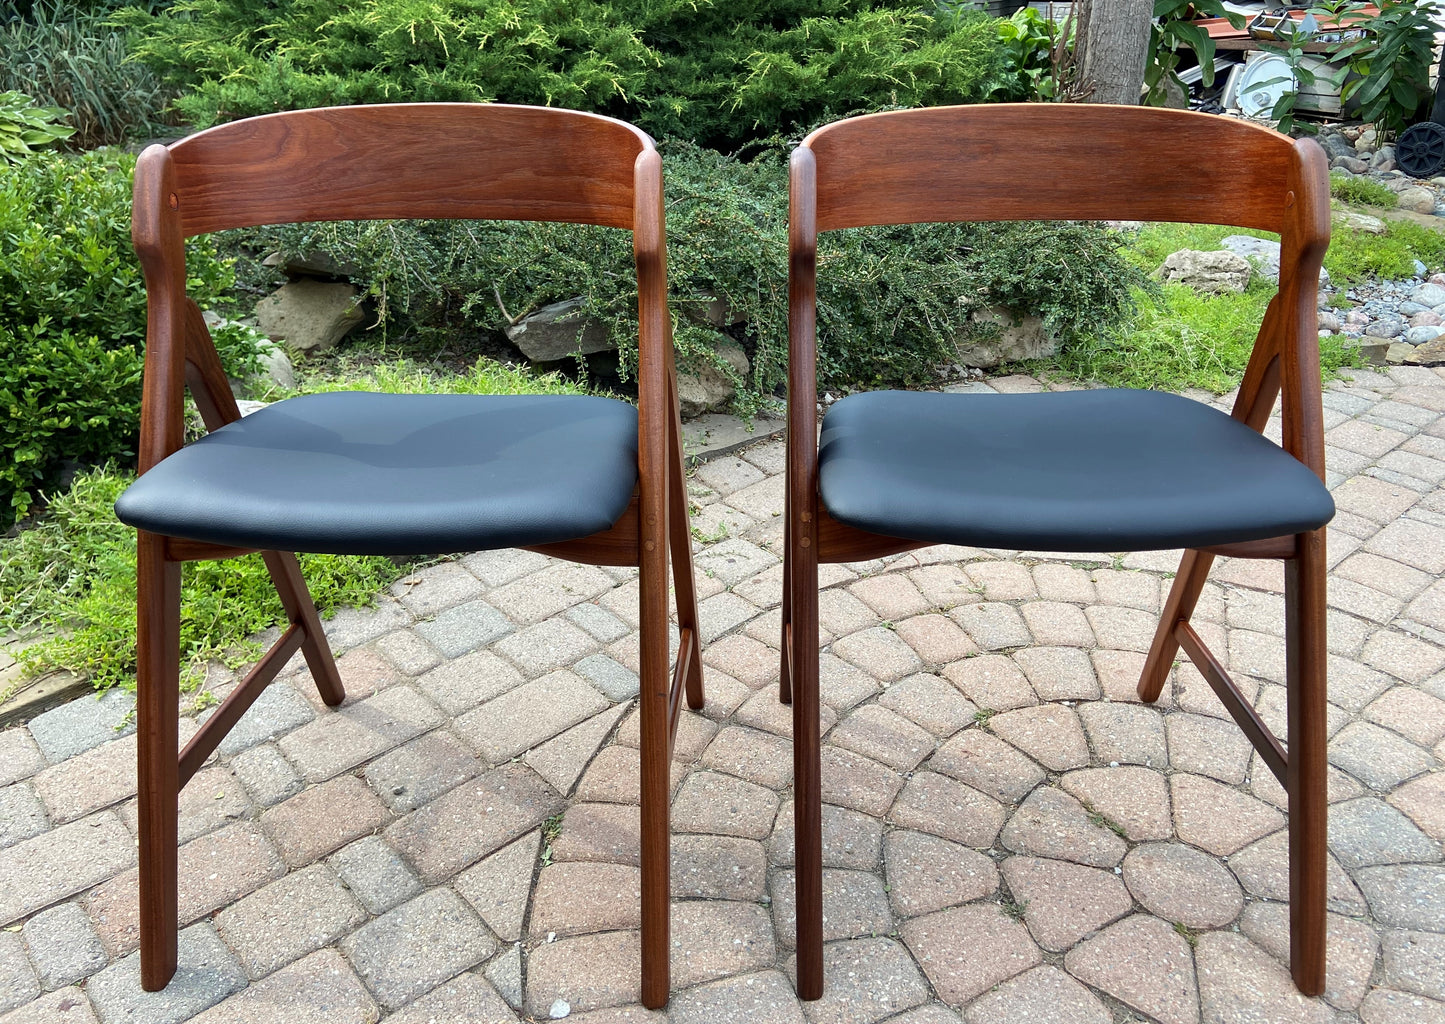 2 REFINISHED REUPHOLSTERED Danish Mid Century Modern Teak Arm Chairs by TH Harlev